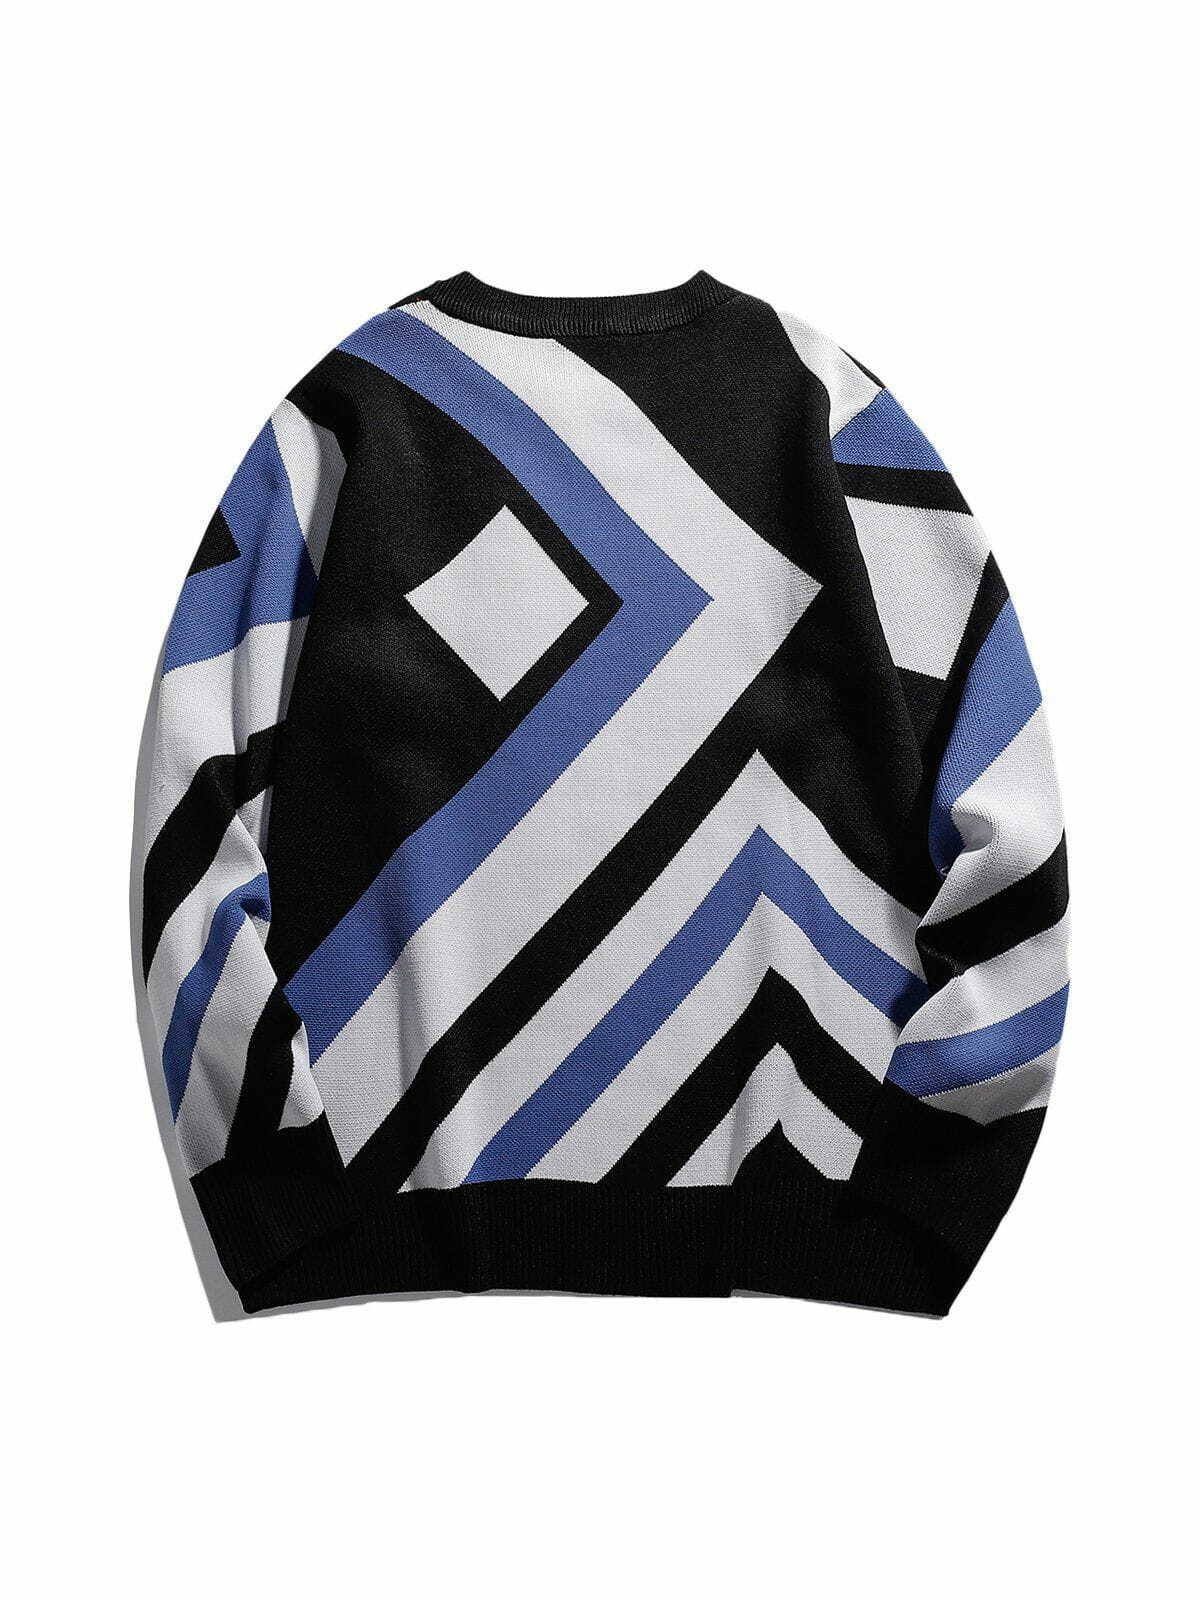 patchwork edgy casual sweater retro streetwear icon 7889